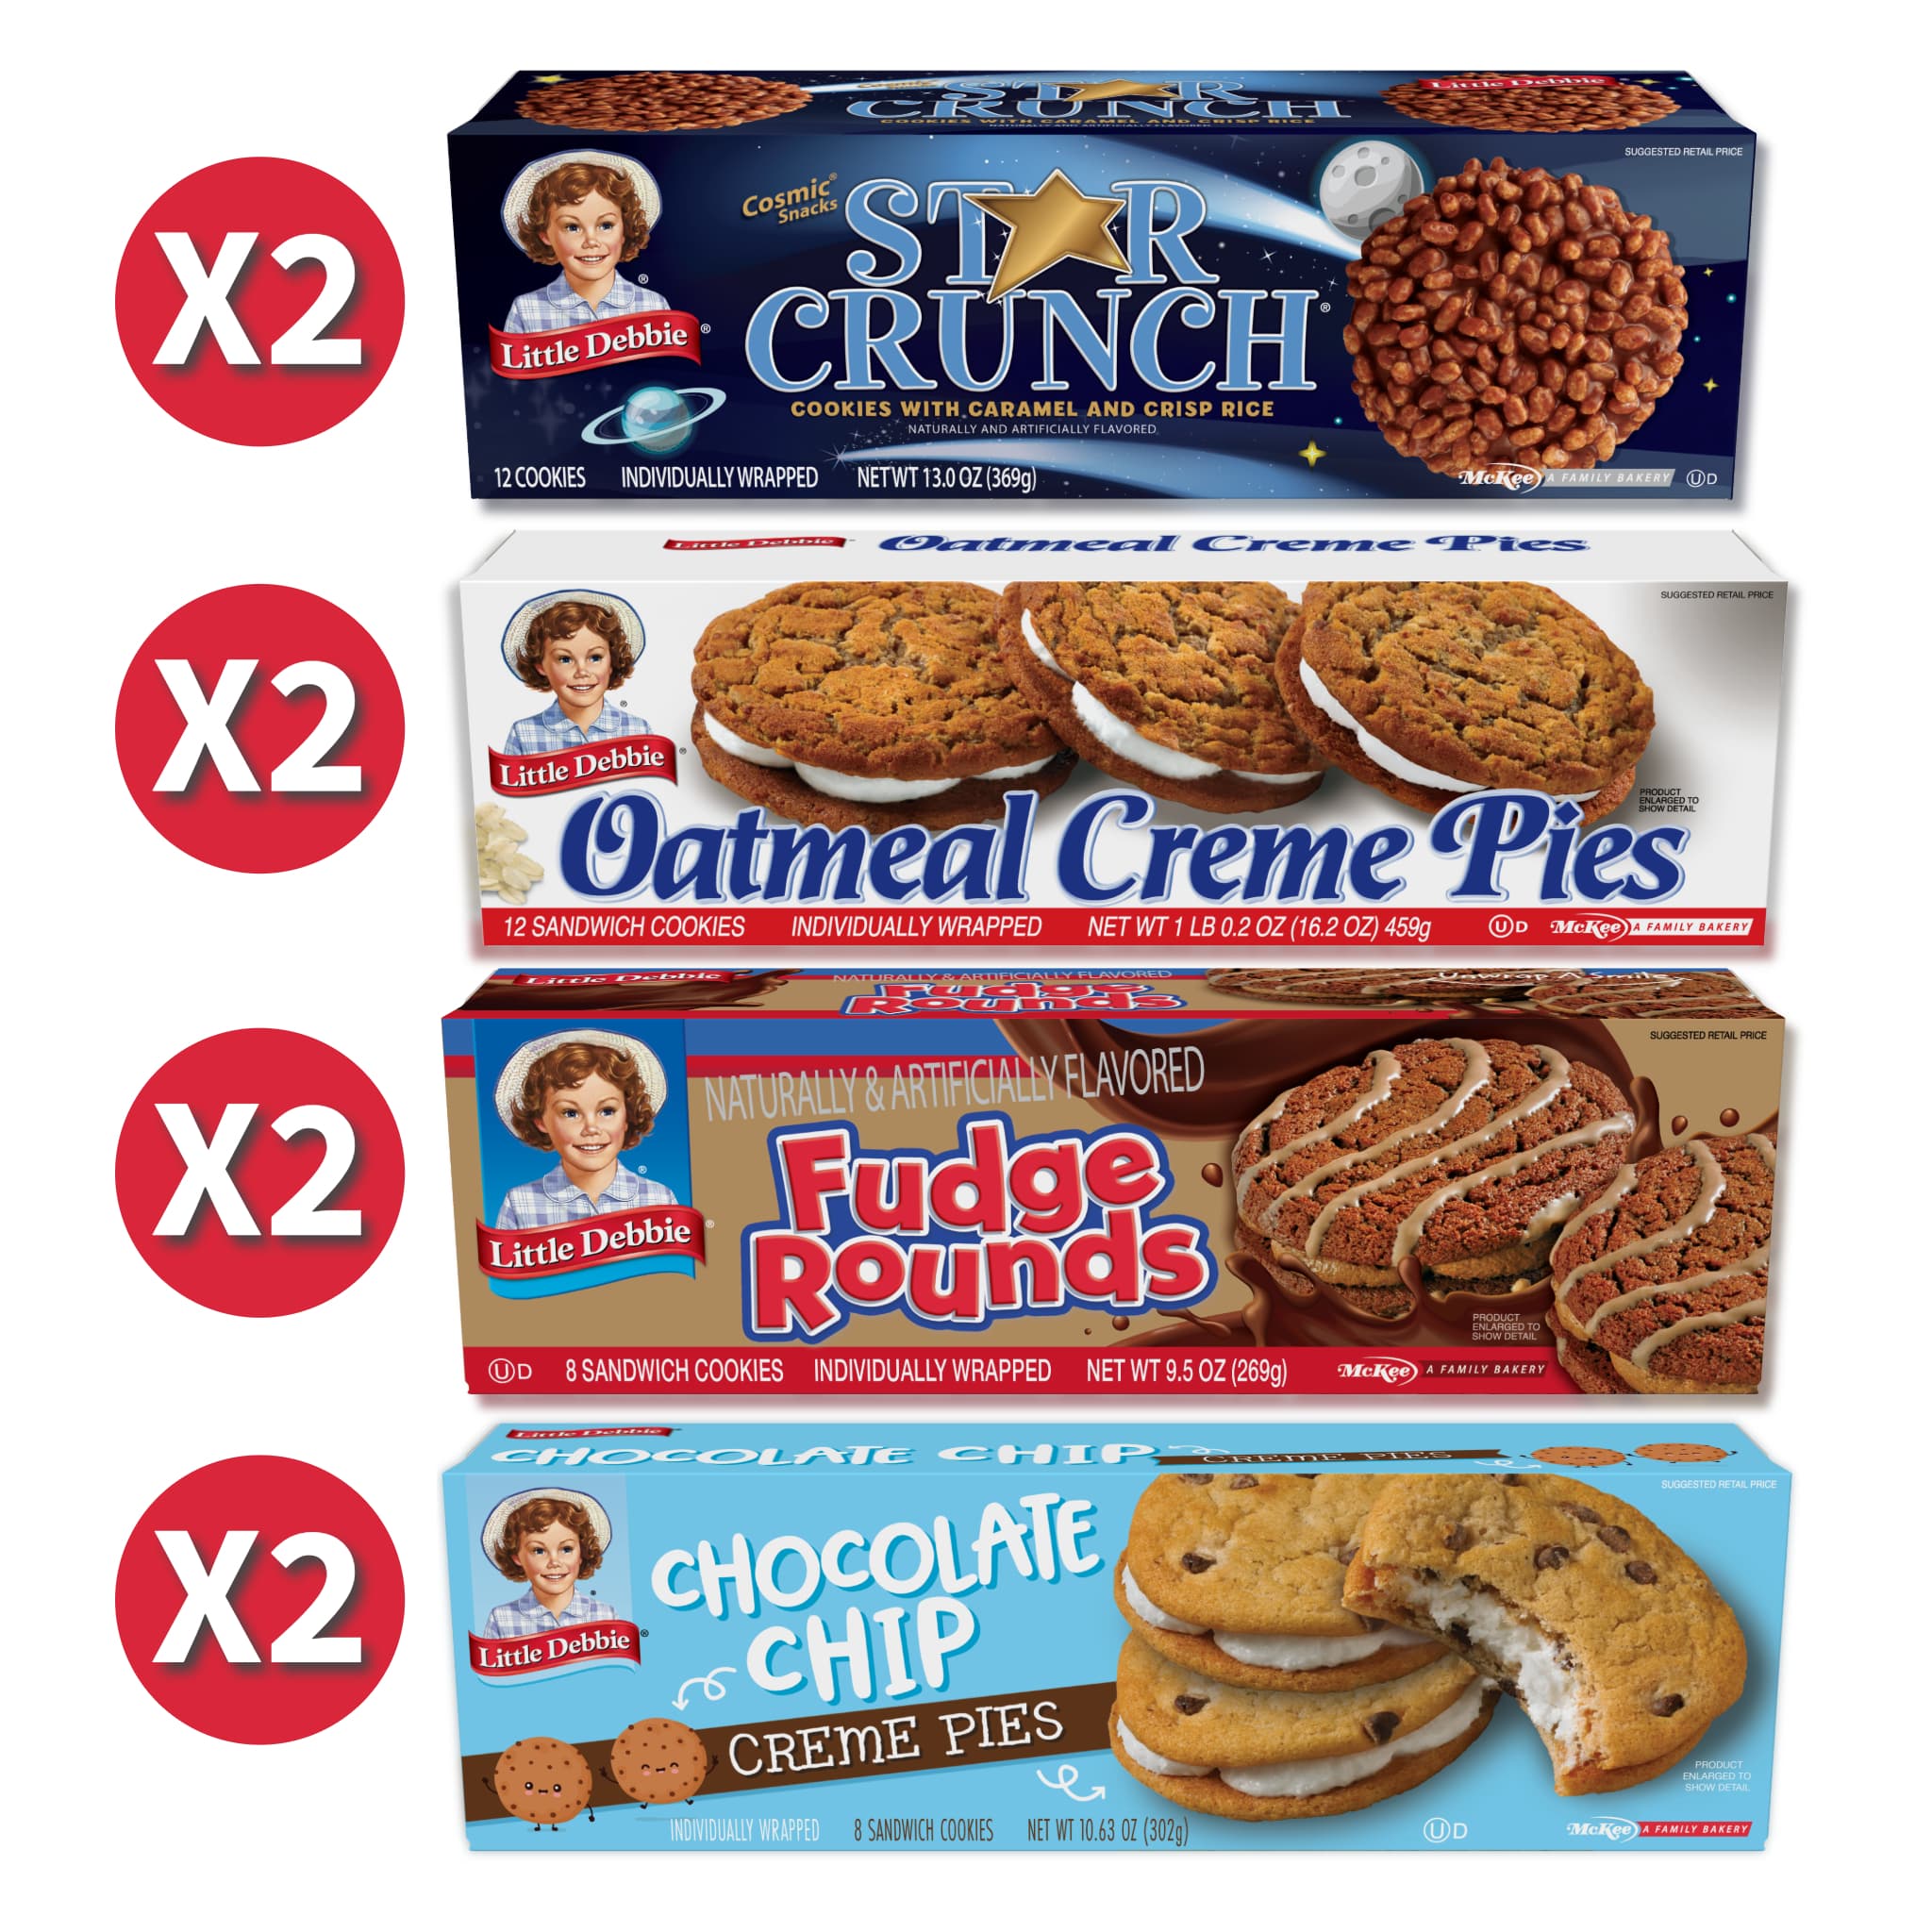 A collection of Little Debbie cookies, including two cartons of Star Crunch Cosmic Snacks, two cartons of Oatmeal Creme Pies, two cartons of Fudge Rounds, and two cartons of Chocolate Chip Creme Pies. Each carton is individually wrapped and displayed with a red circle and "X2" indicating the quantity.